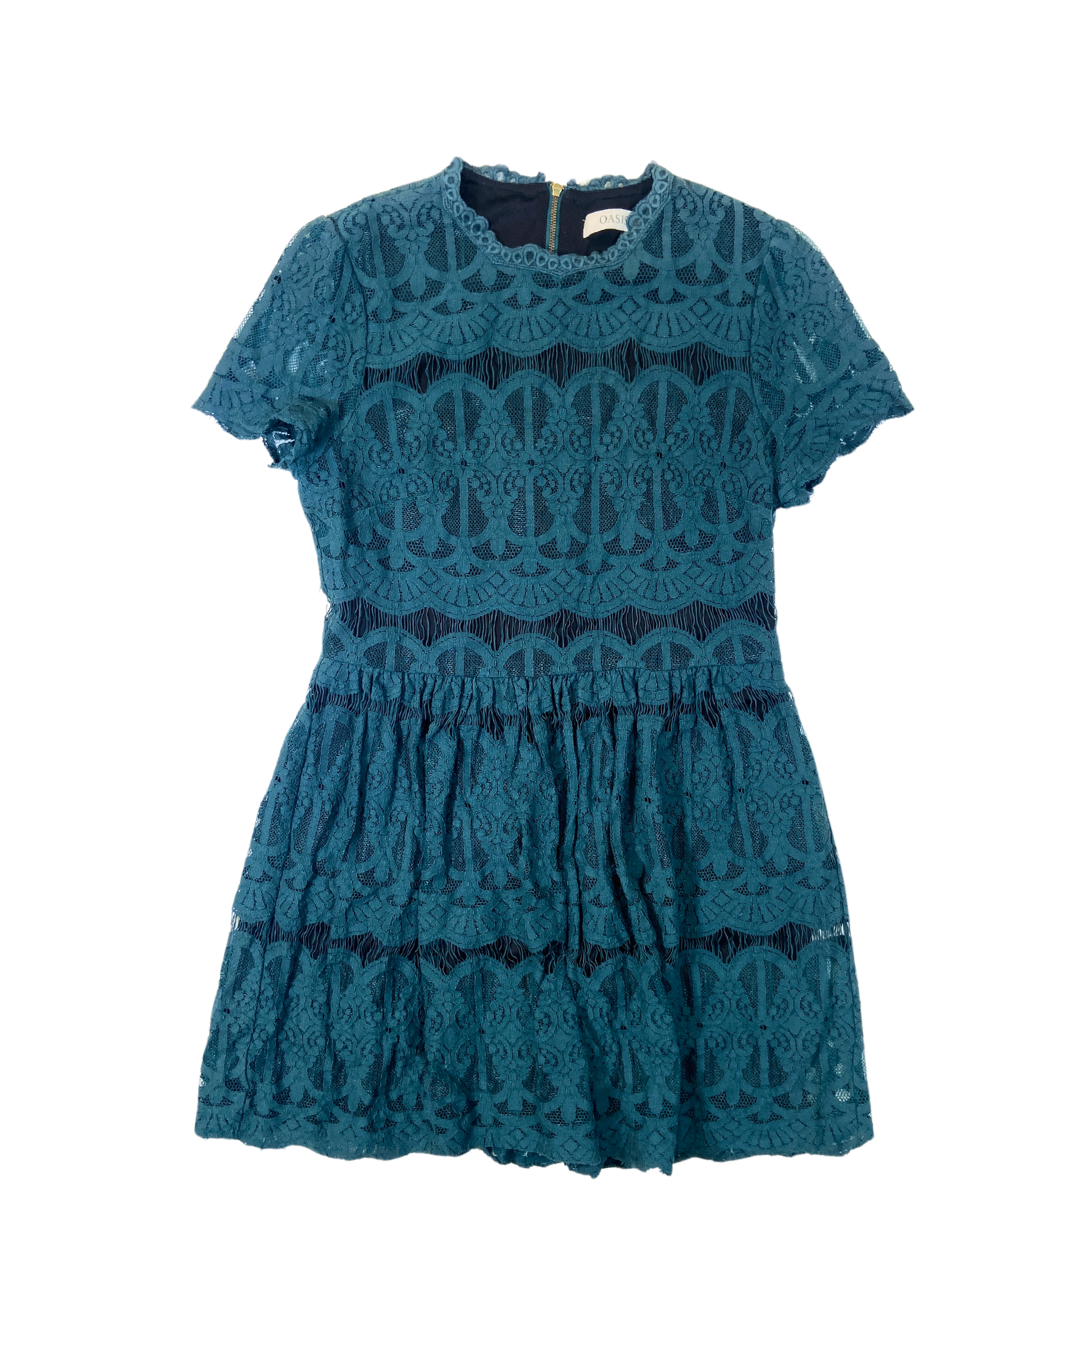 Oasis Teal Lace Dress